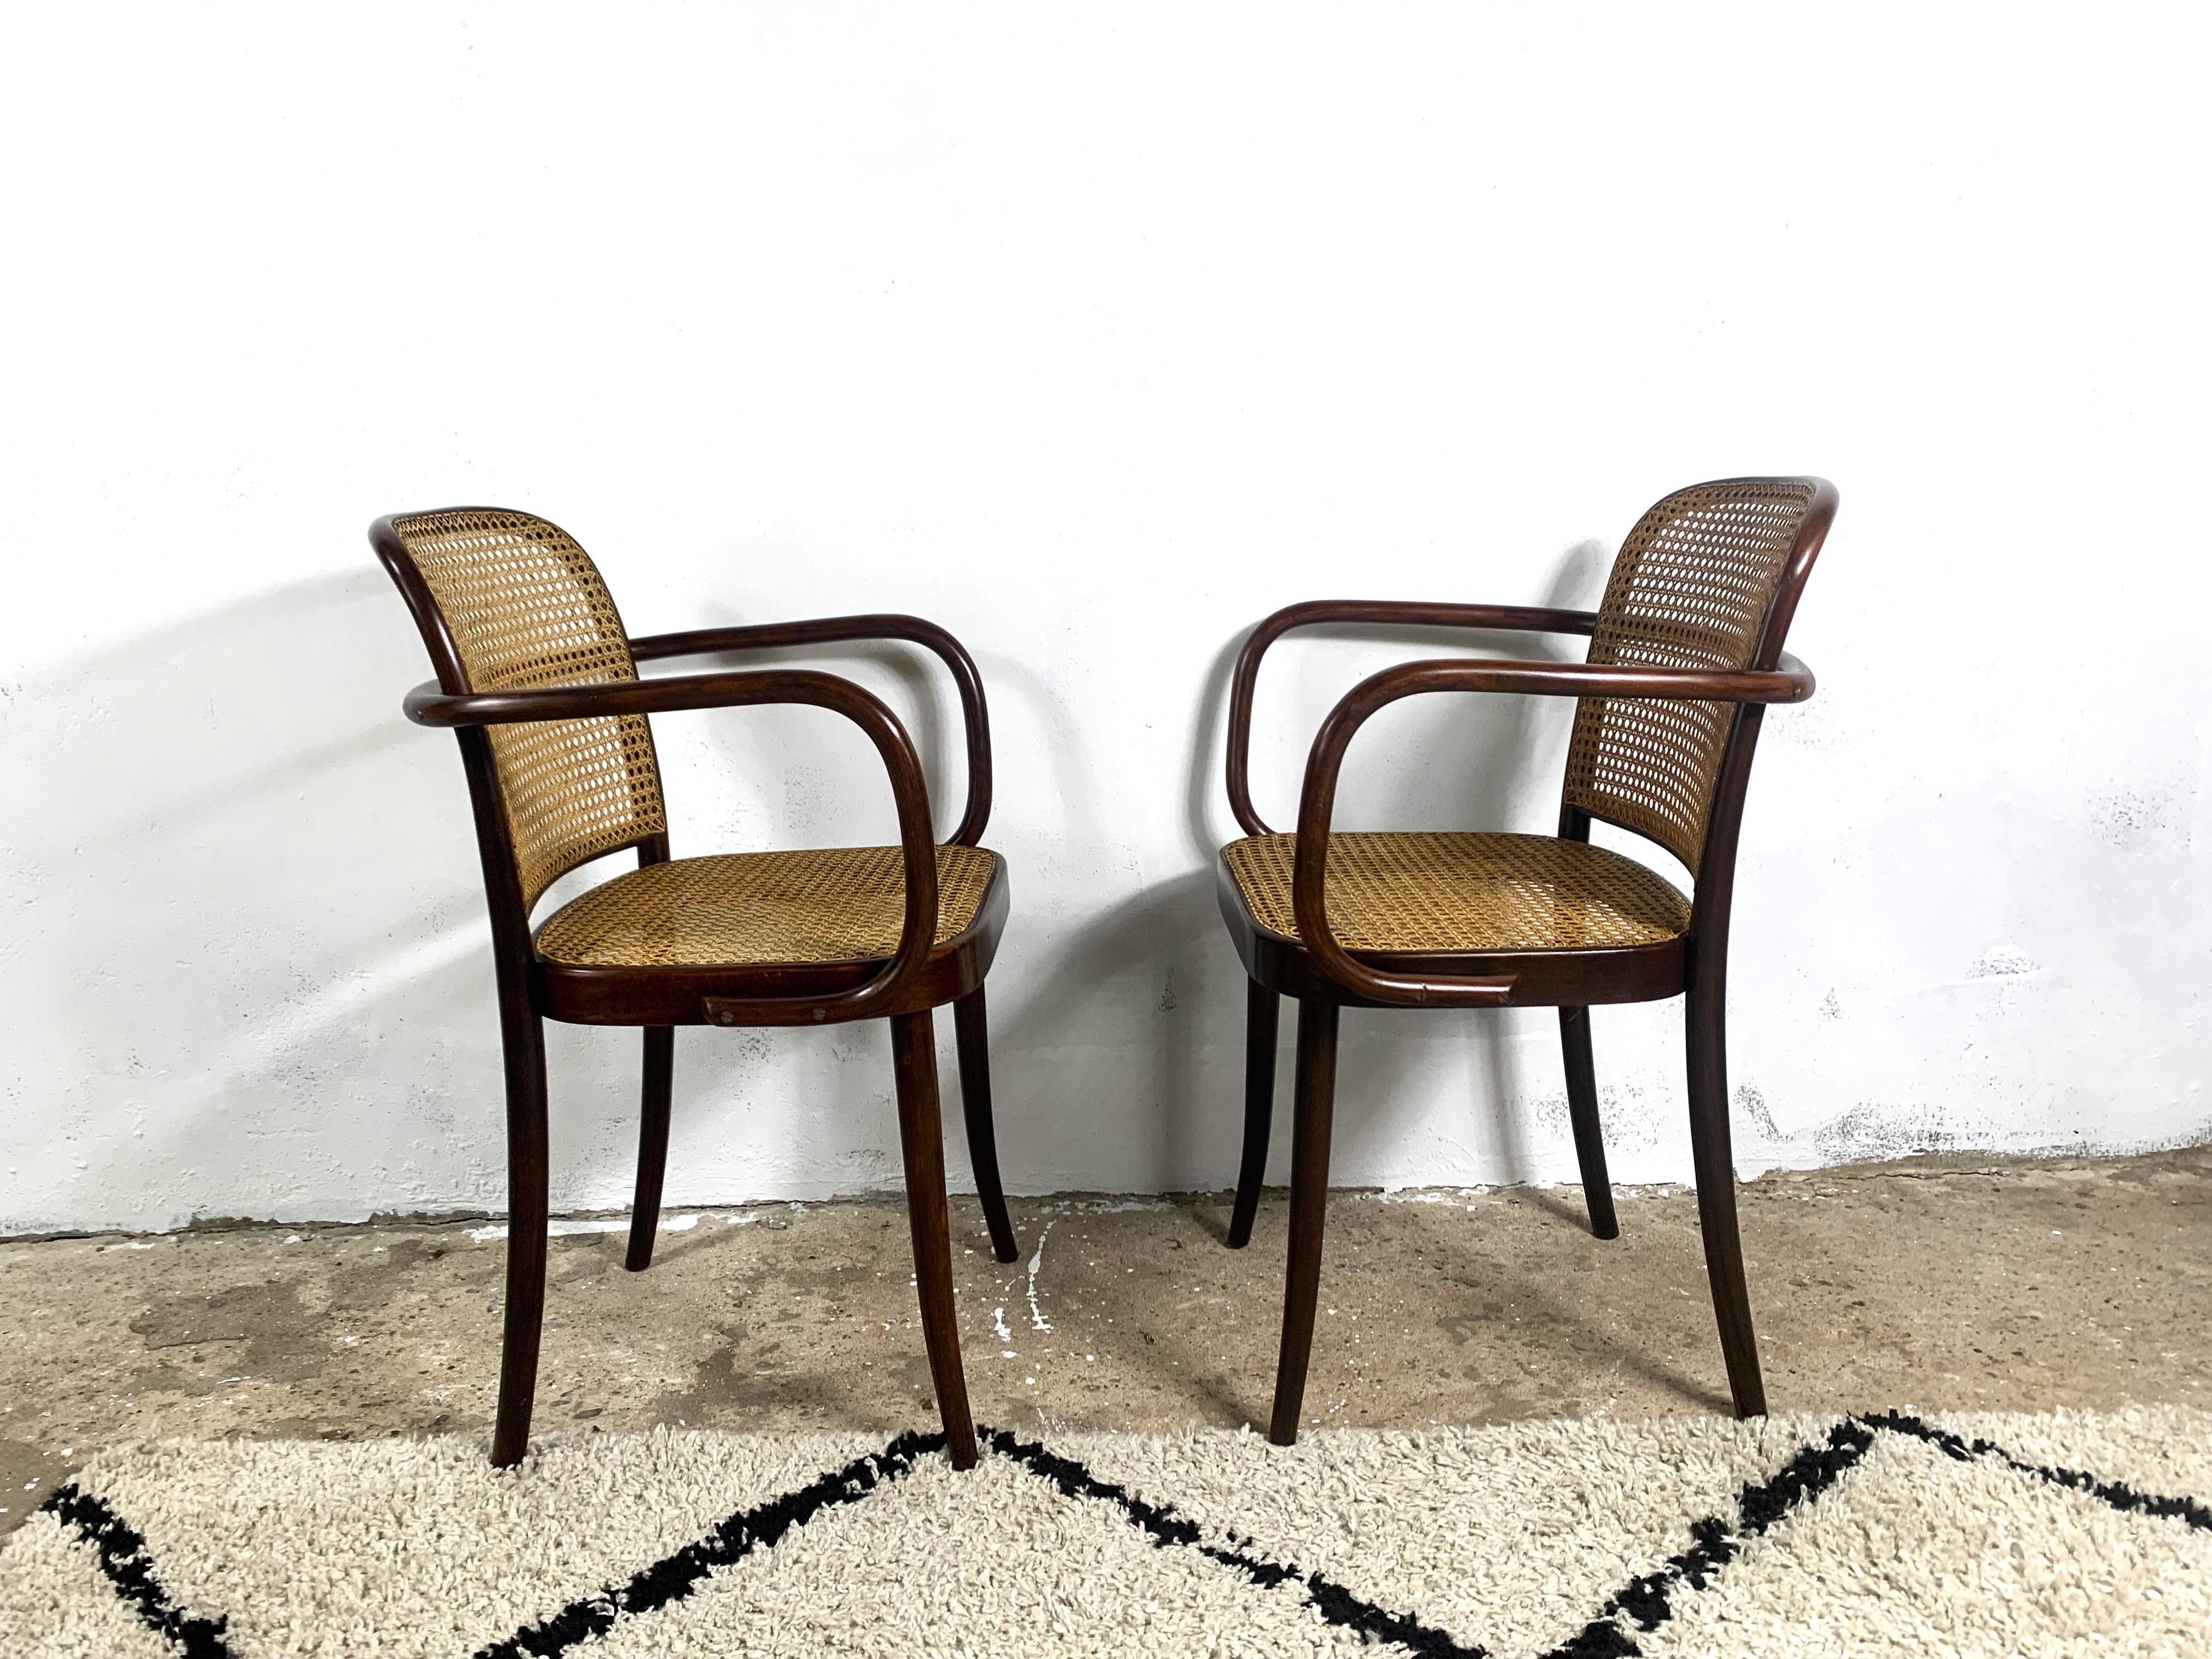 Thonet A811, 1930s, Rattan, Vintage - set of 2 For Sale 3